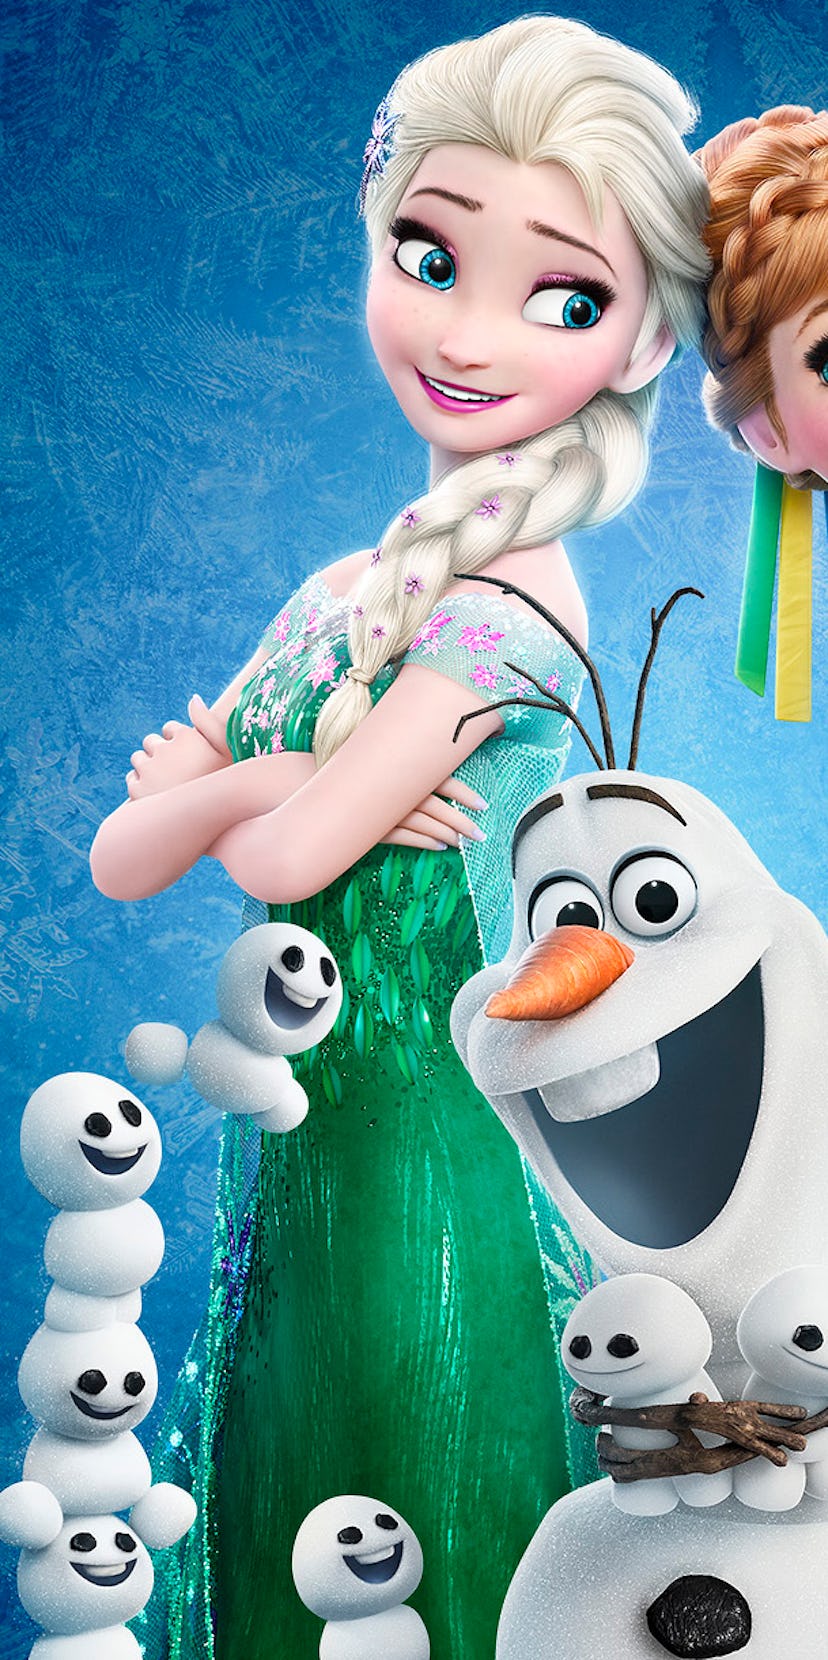 7 Questions About 'Frozen Fever' Poster, Because Are Those Mini-Snowmen ...